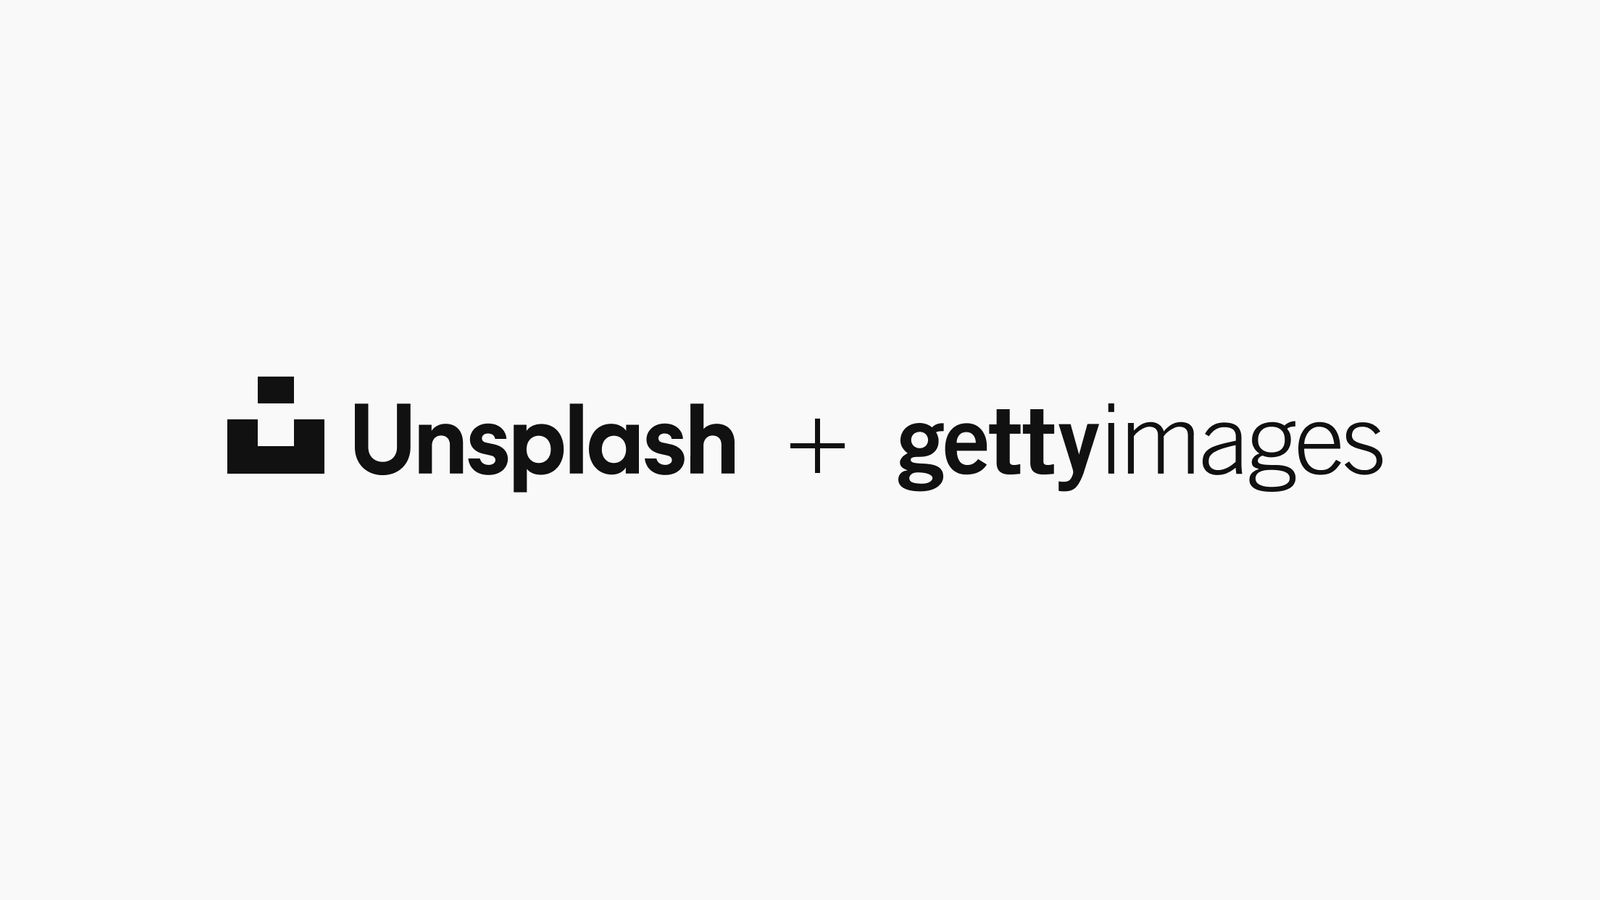 Unsplash is being acquired by Getty Images